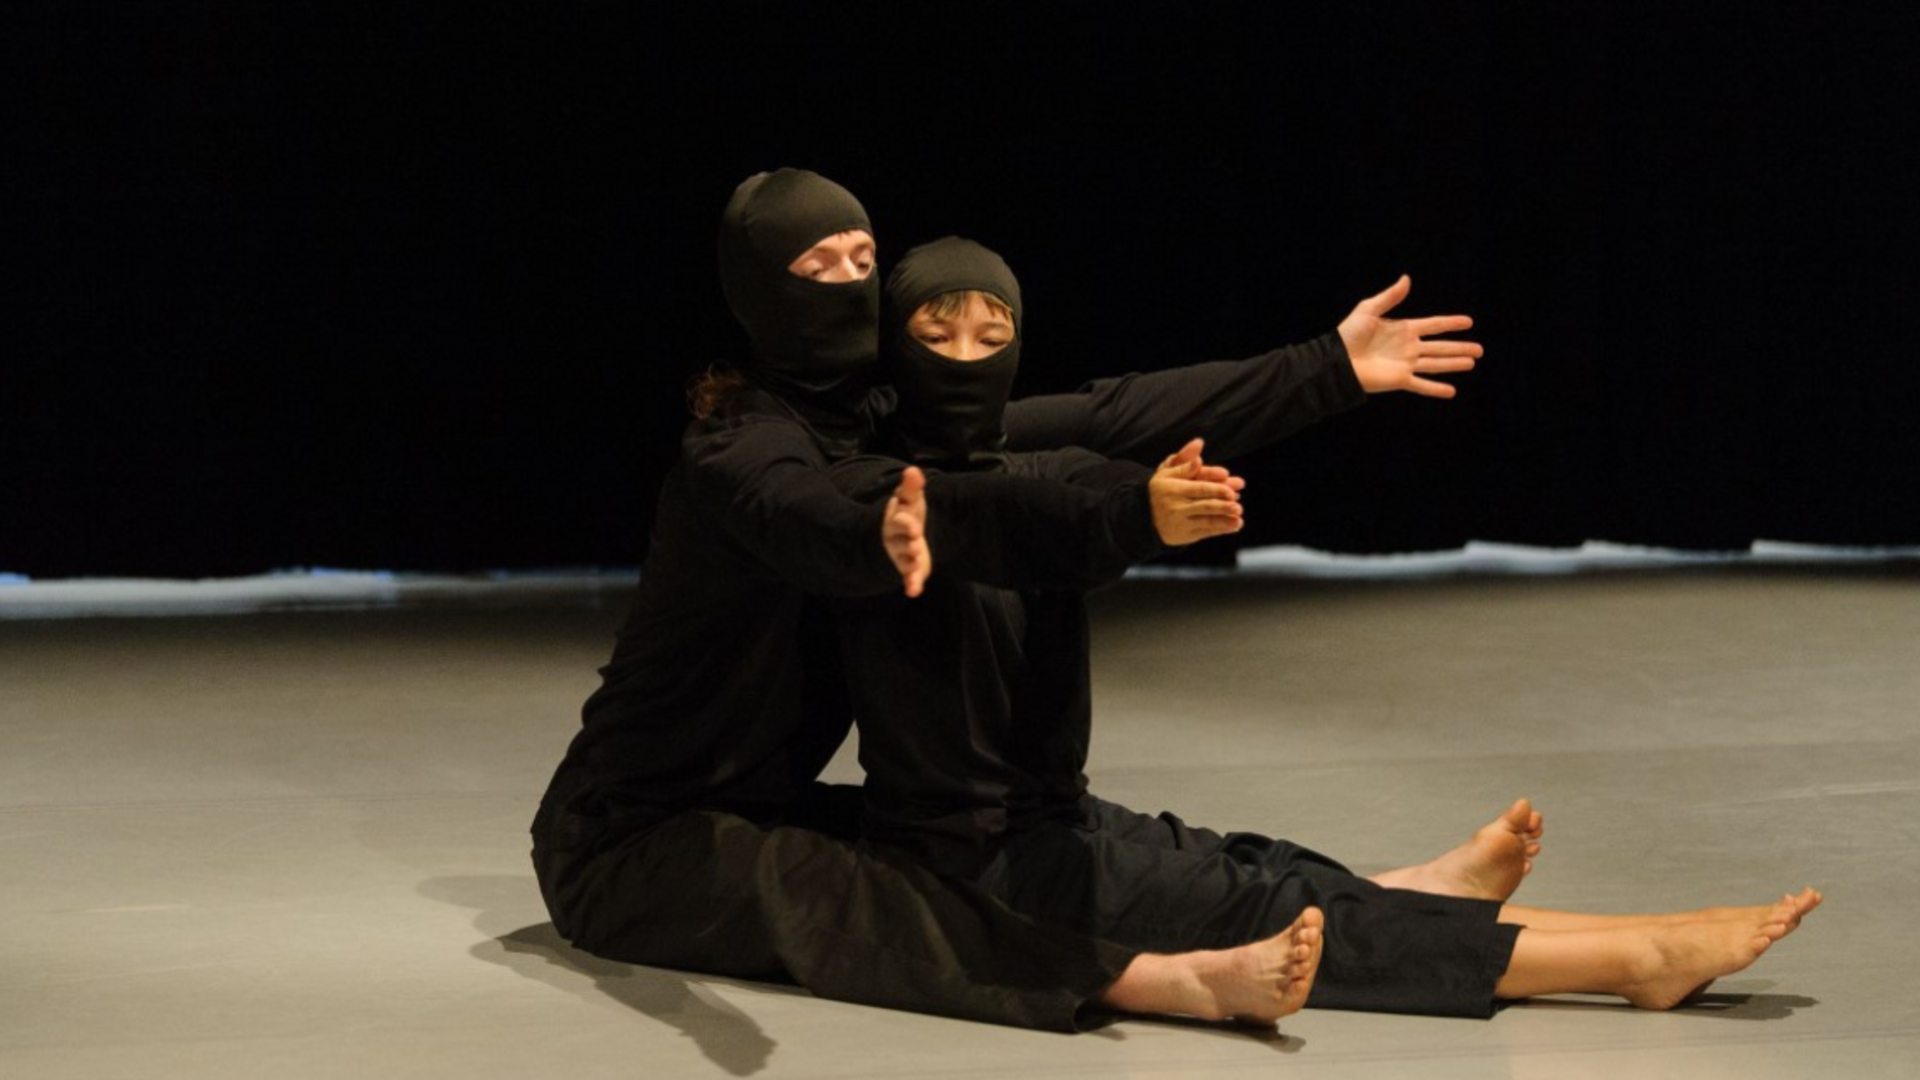 2 dancers dressed in black and wearing balaclavas sit on the floor of a dane studio, one behind the other. Both with outstretched arms and legs.